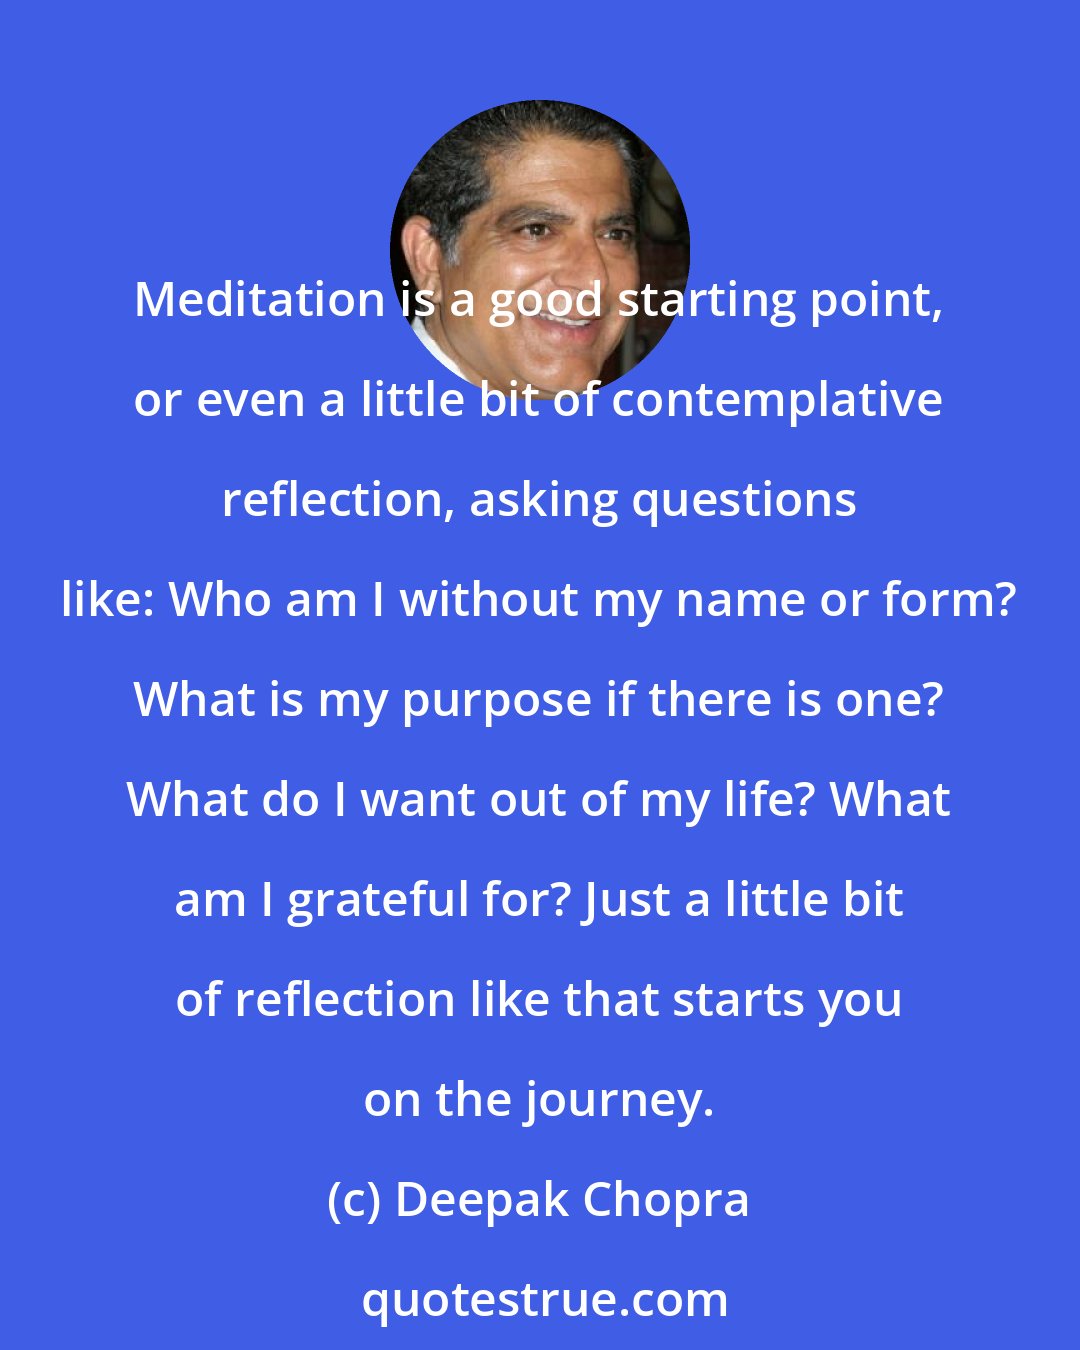 Deepak Chopra: Meditation is a good starting point, or even a little bit of contemplative reflection, asking questions like: Who am I without my name or form? What is my purpose if there is one? What do I want out of my life? What am I grateful for? Just a little bit of reflection like that starts you on the journey.